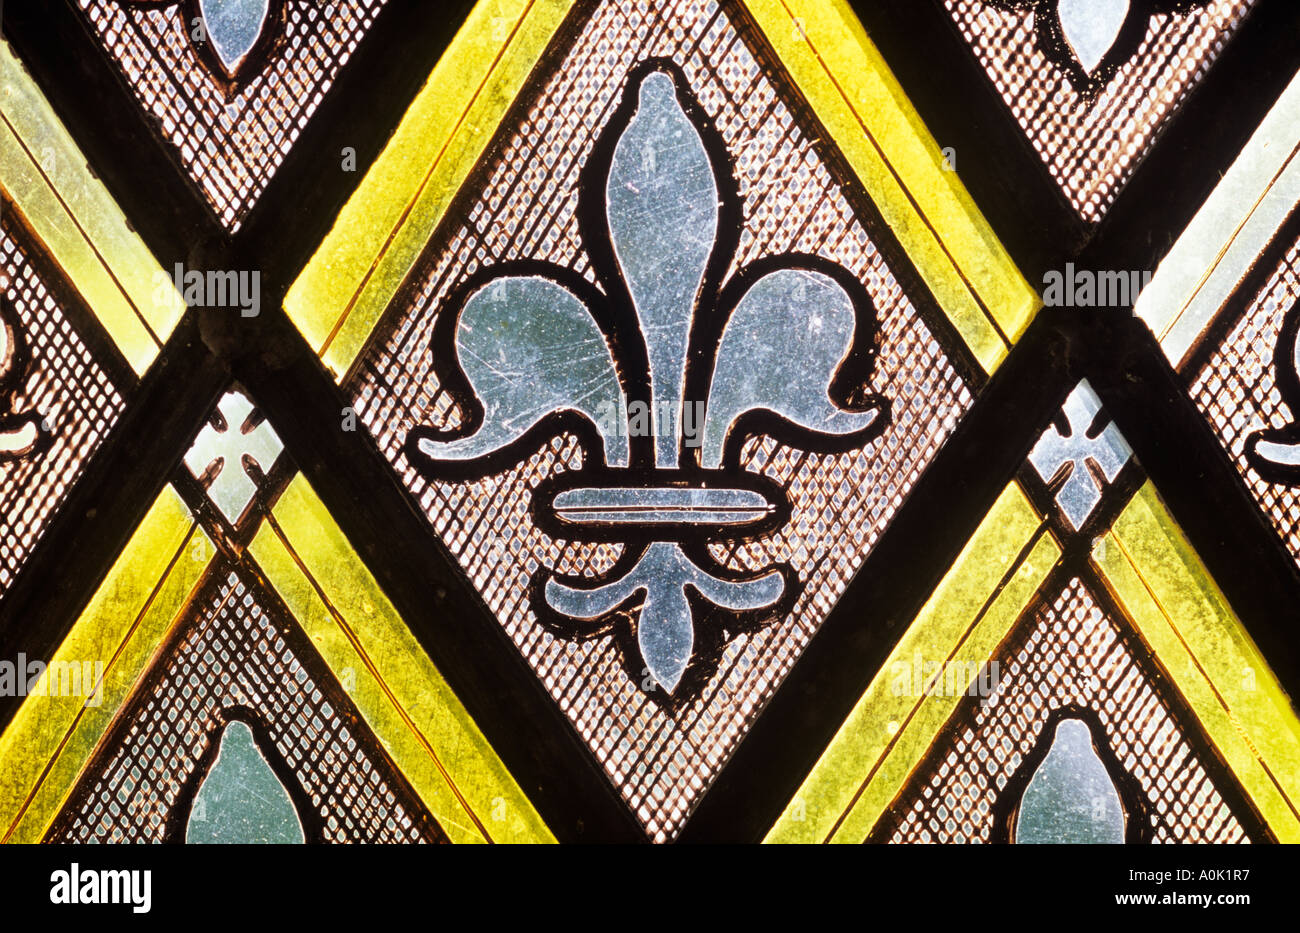 Close up straight on detail of Victorian diamond patterned stained glass with a repeating fleur-de-lys motif Stock Photo